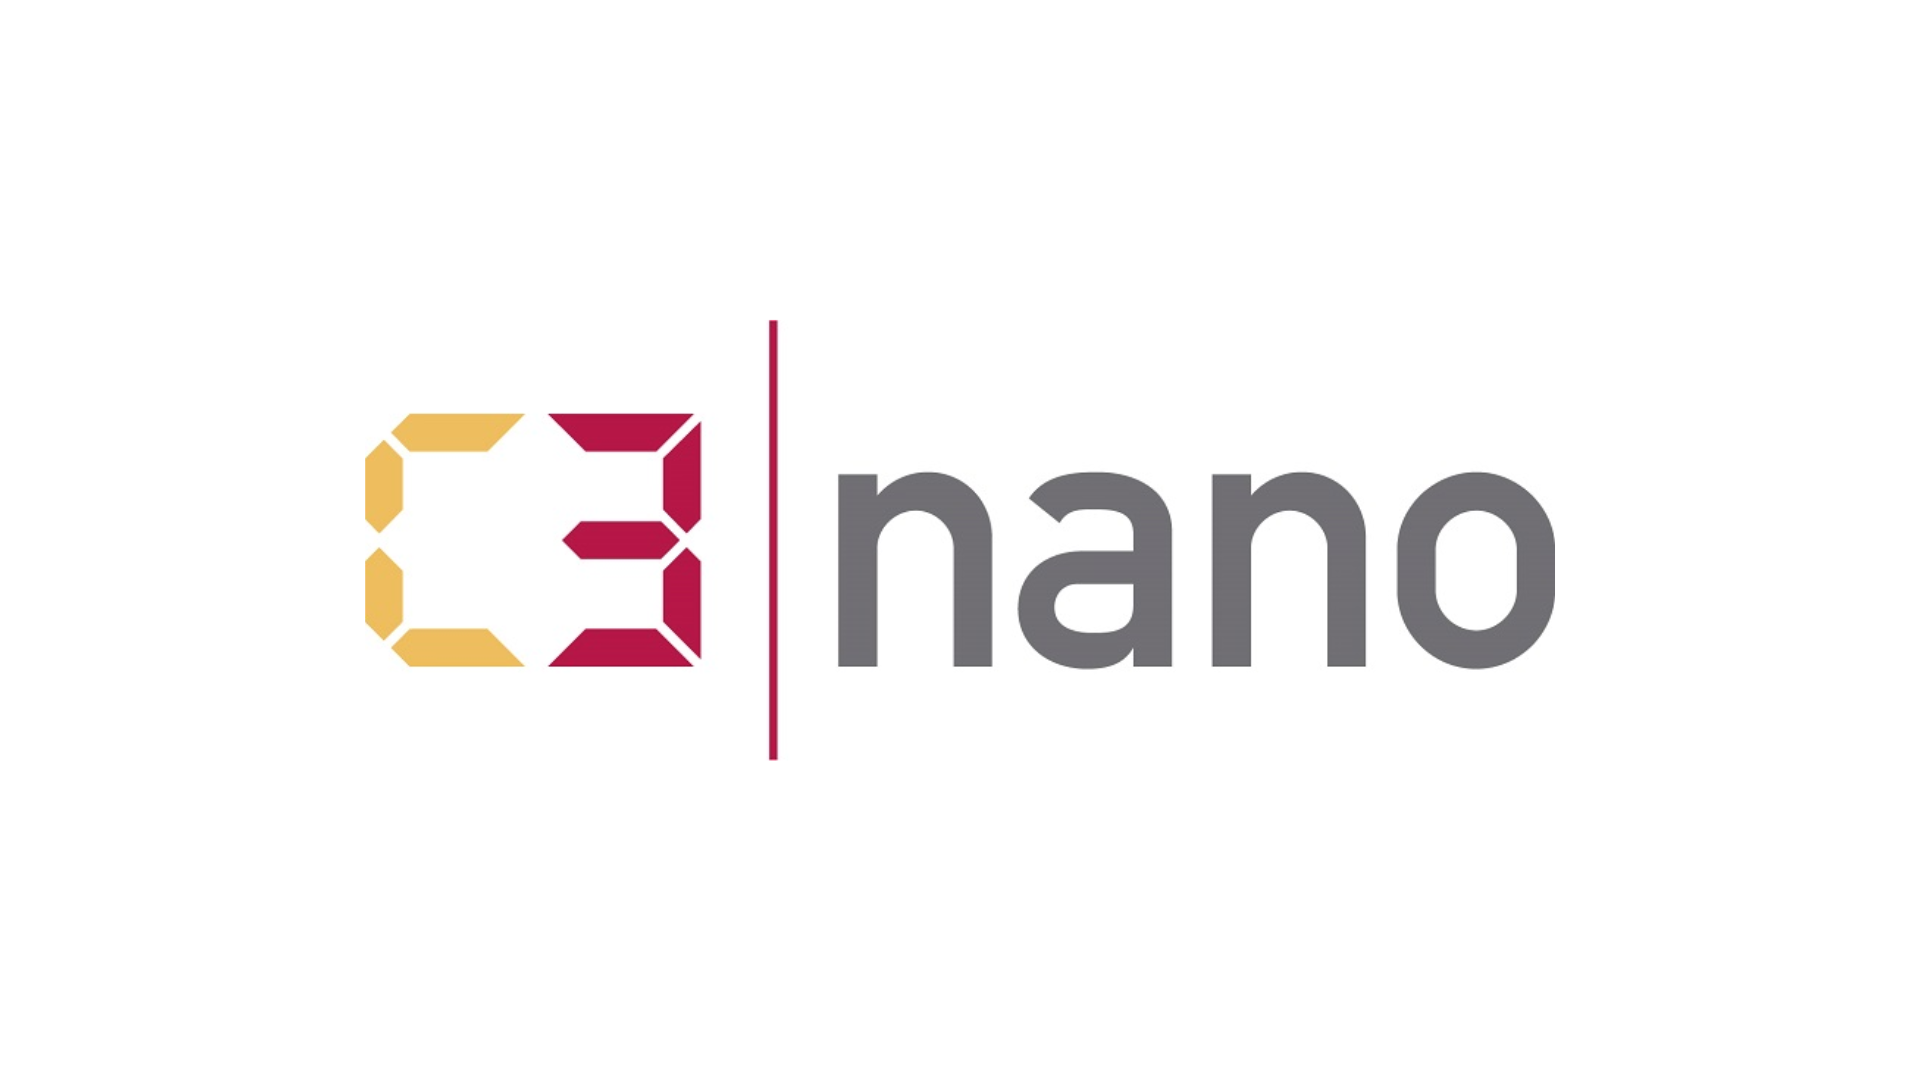 C3Nano, Inc. announced the development of SuperGrid™, a novel printable conductive ink with room temperature processing.